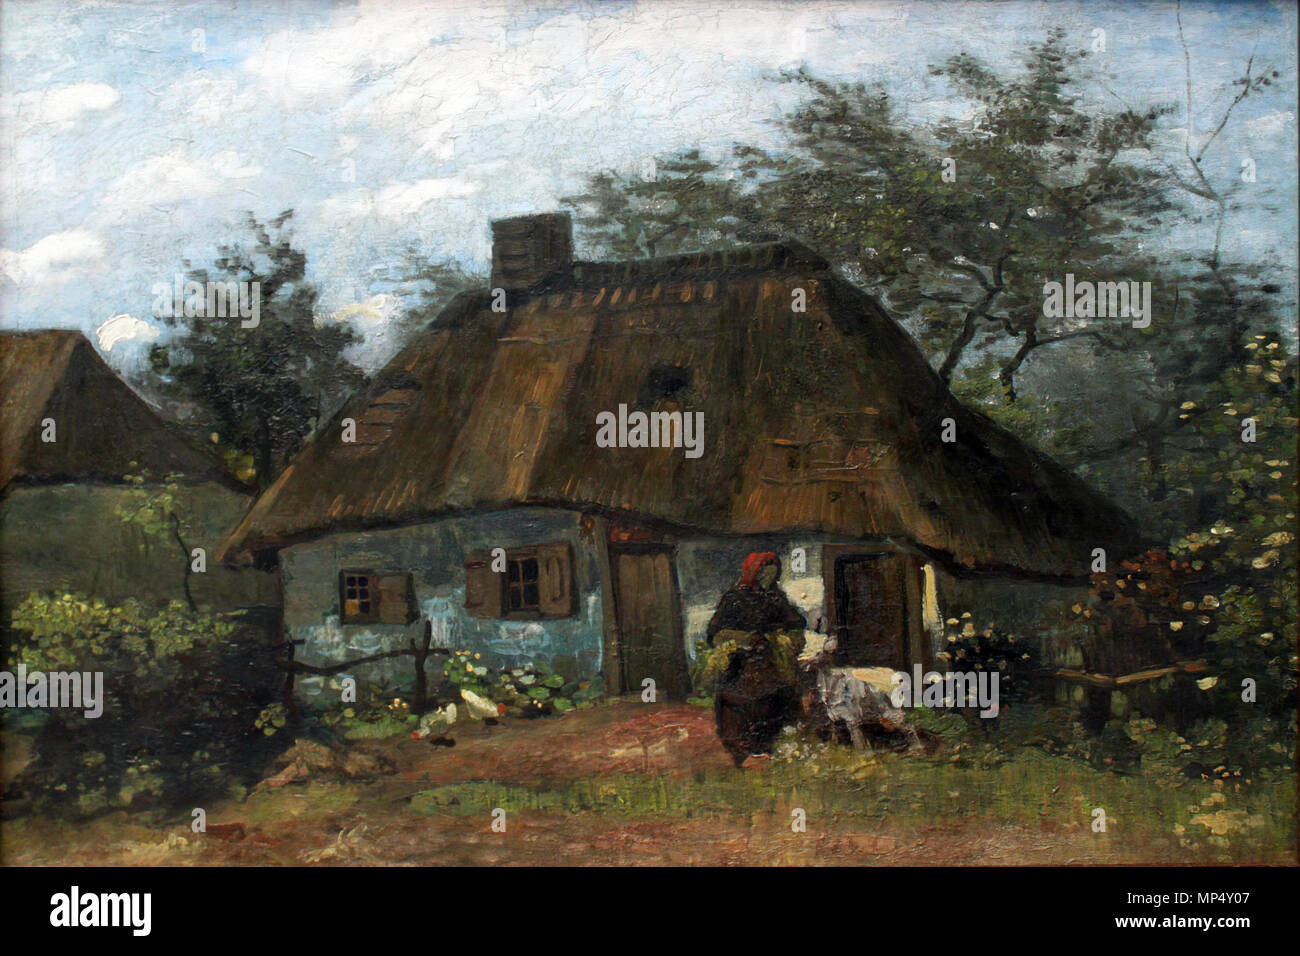 Cottage and Woman with Goat / Farmhouse in Nuenen (La Chaumiére)   Nuenen, June 1885 - July 1885.   1223 1885 van Gogh Bauernhaus in Nuenen anagoria Stock Photo